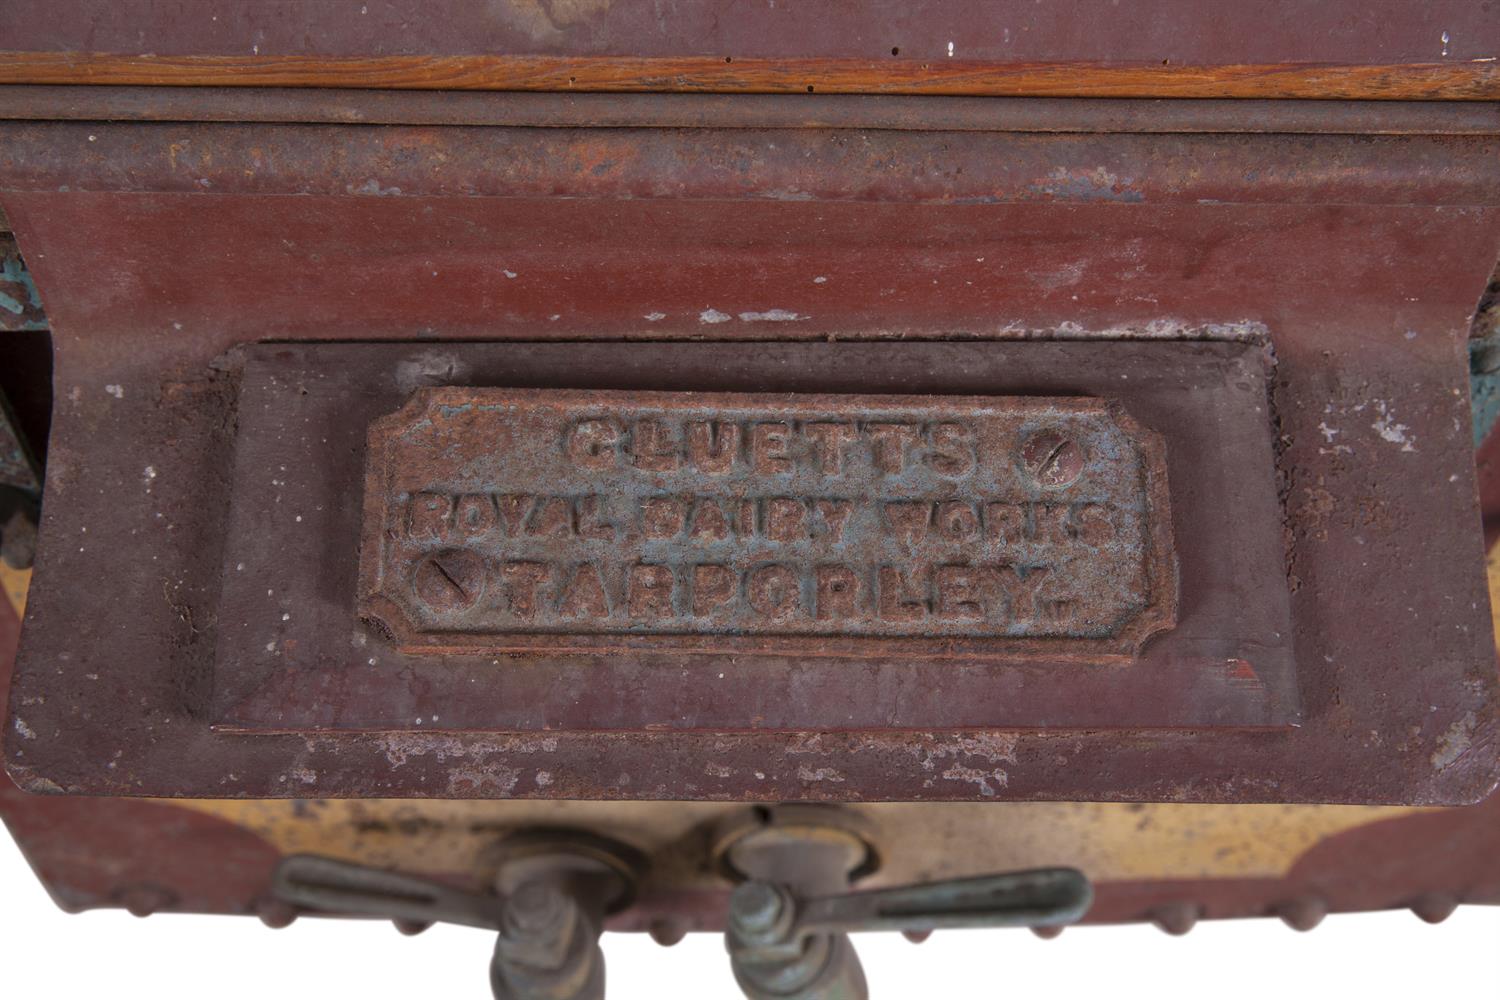 AN EDWARDIAN PAINTED METAL DAIRY CARRIAGE, on iron wheels, with plaque 'CLUETTS ROYAL DAIRY WORK - Image 2 of 2